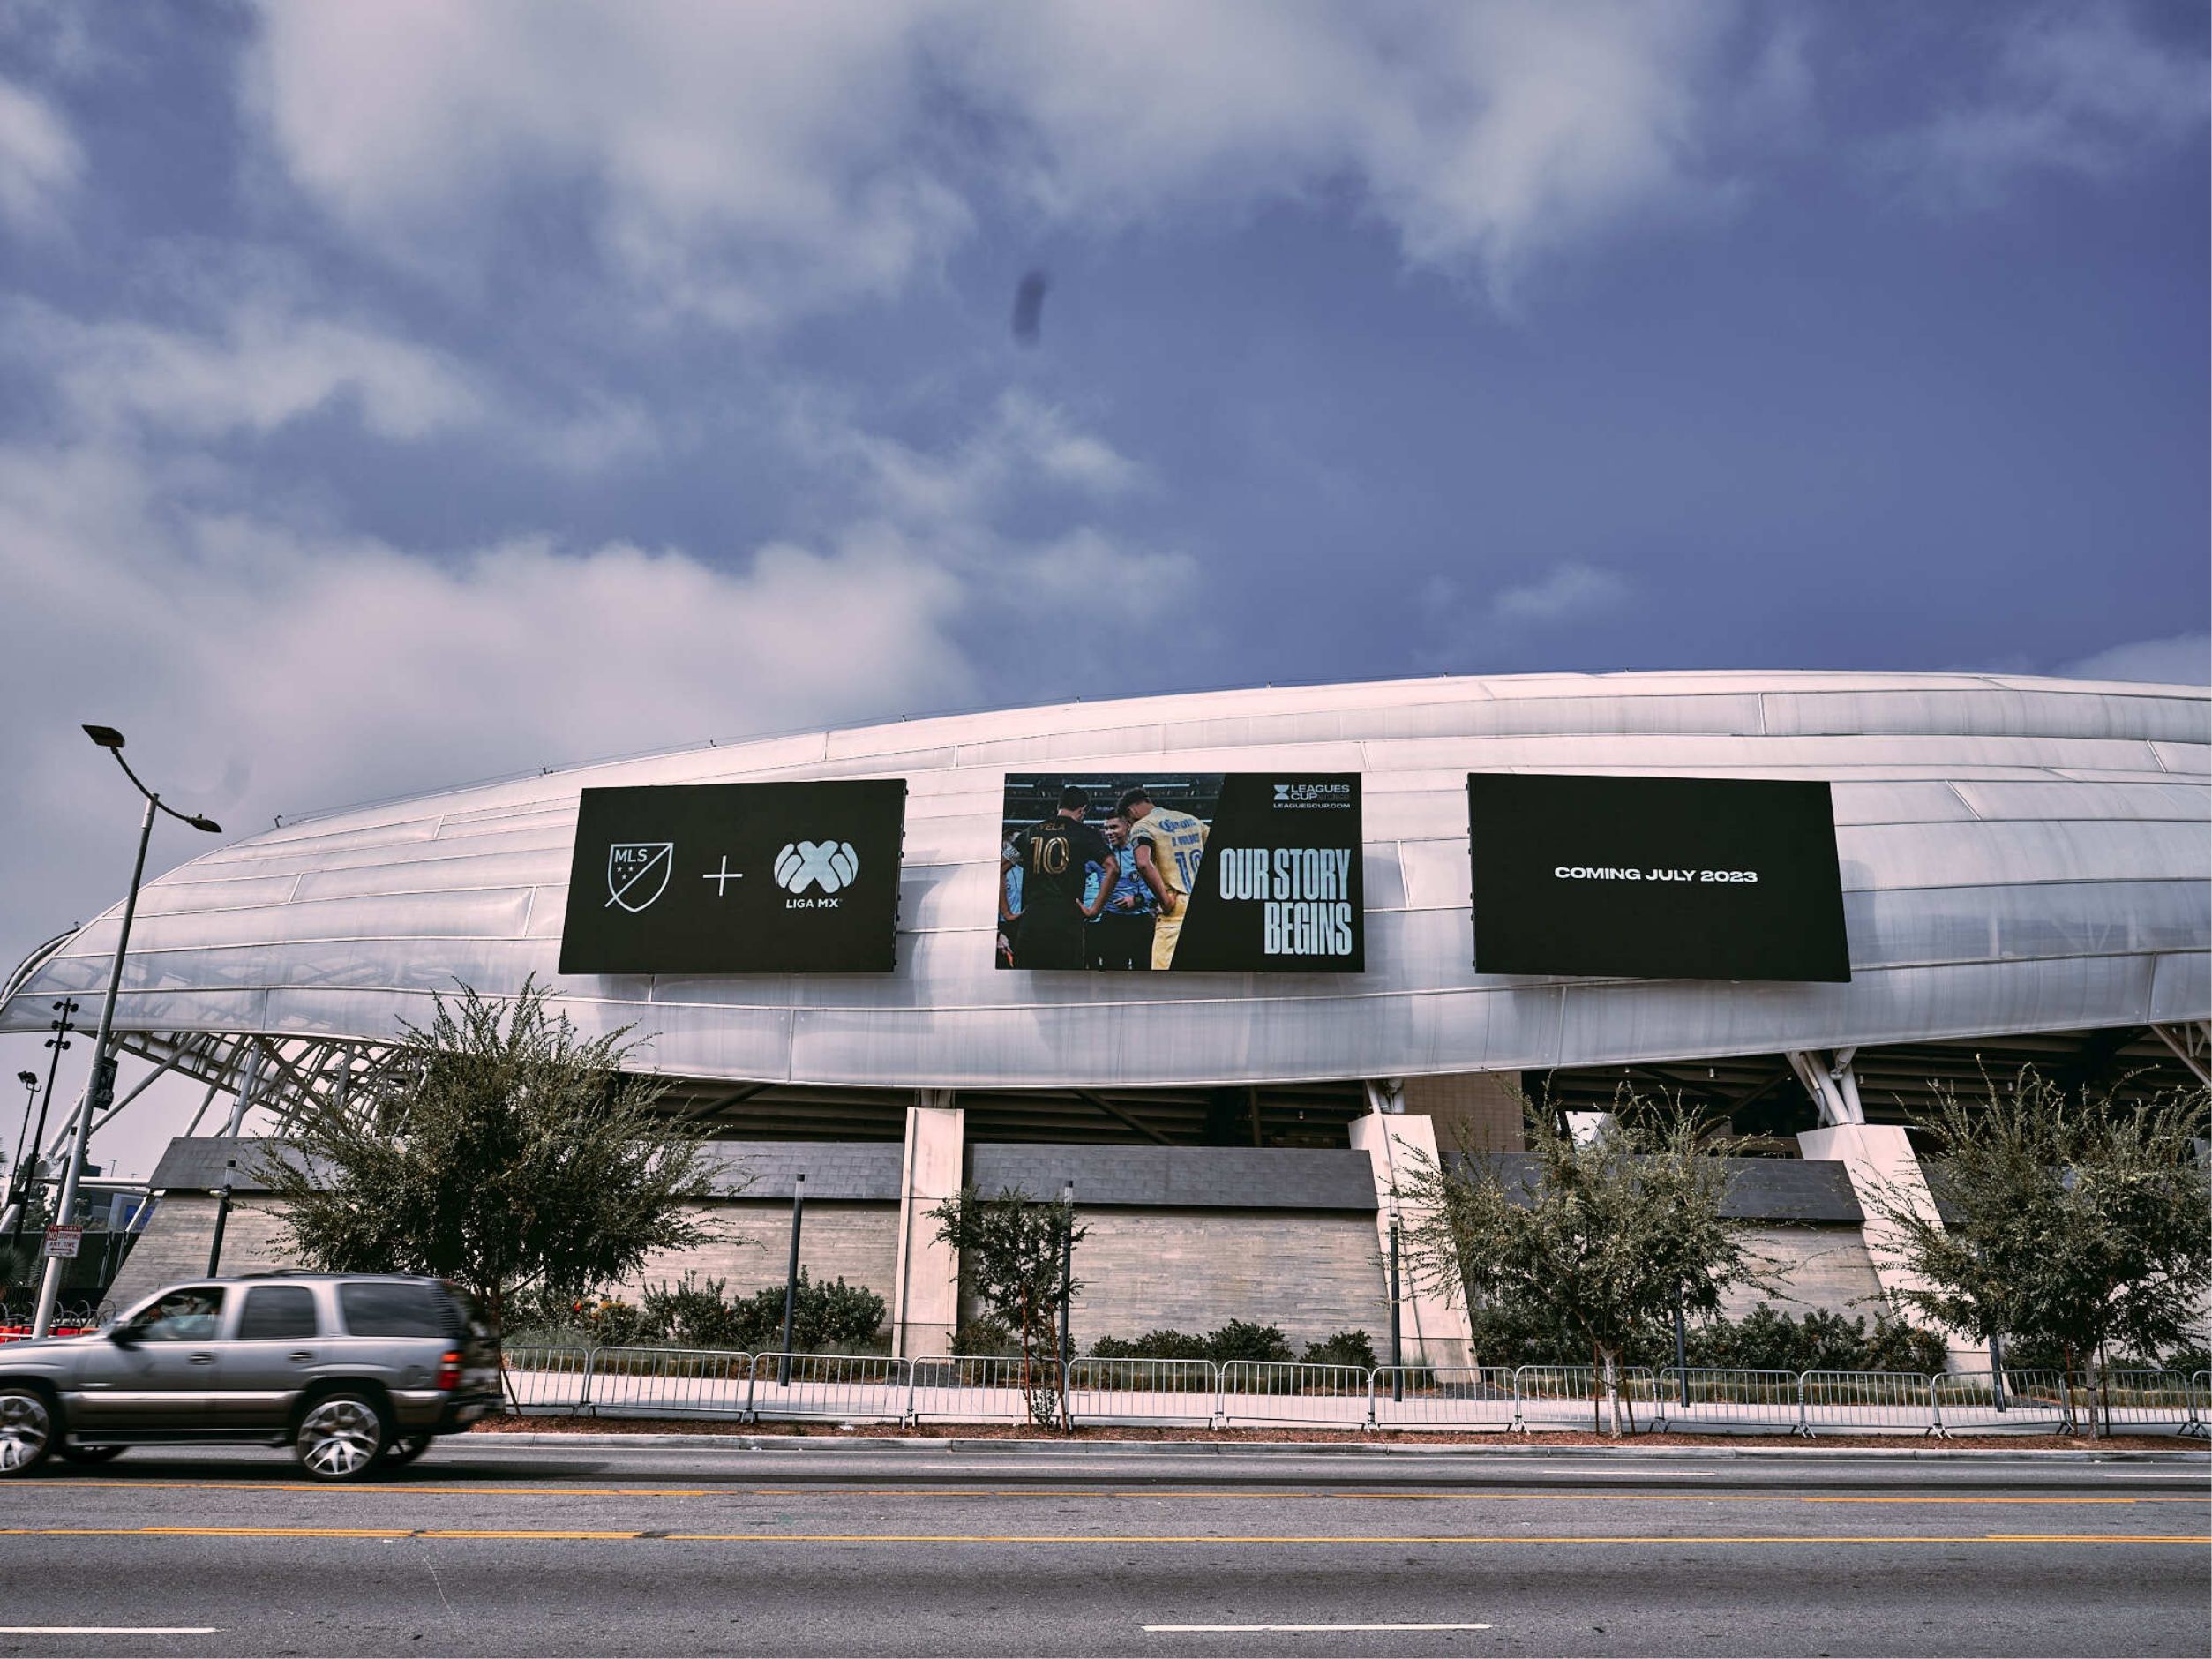 Three Leagues Cup billboard on the side of Banc of California stadium. MLS plus Liga MX. Our Story Begins. Coming July 2023